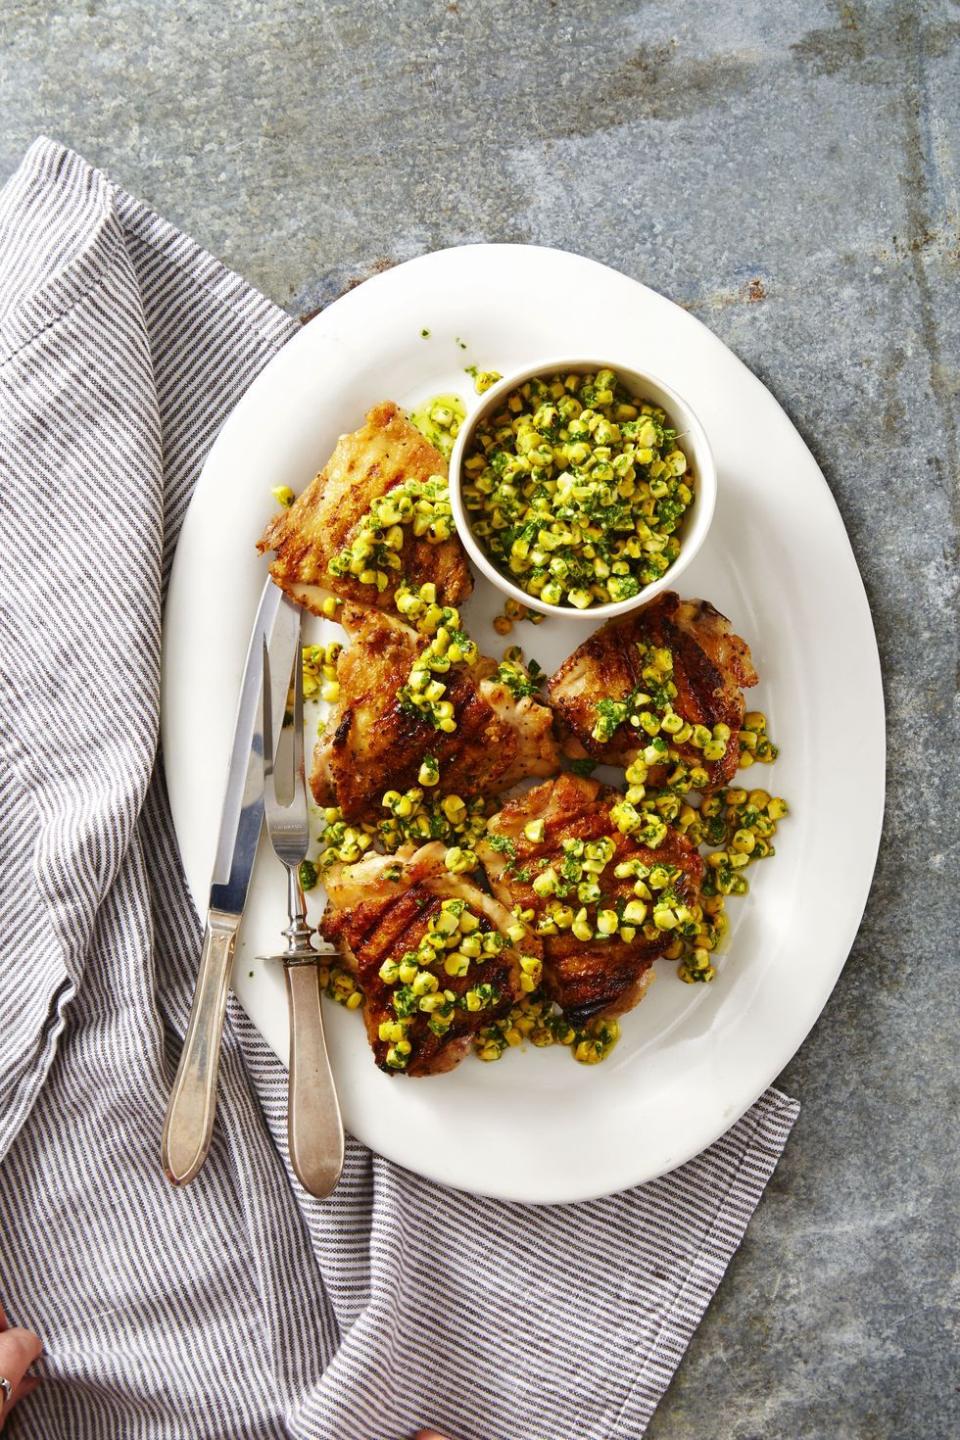 Creative Grilled Chicken Recipes That Keep Dinner Exciting